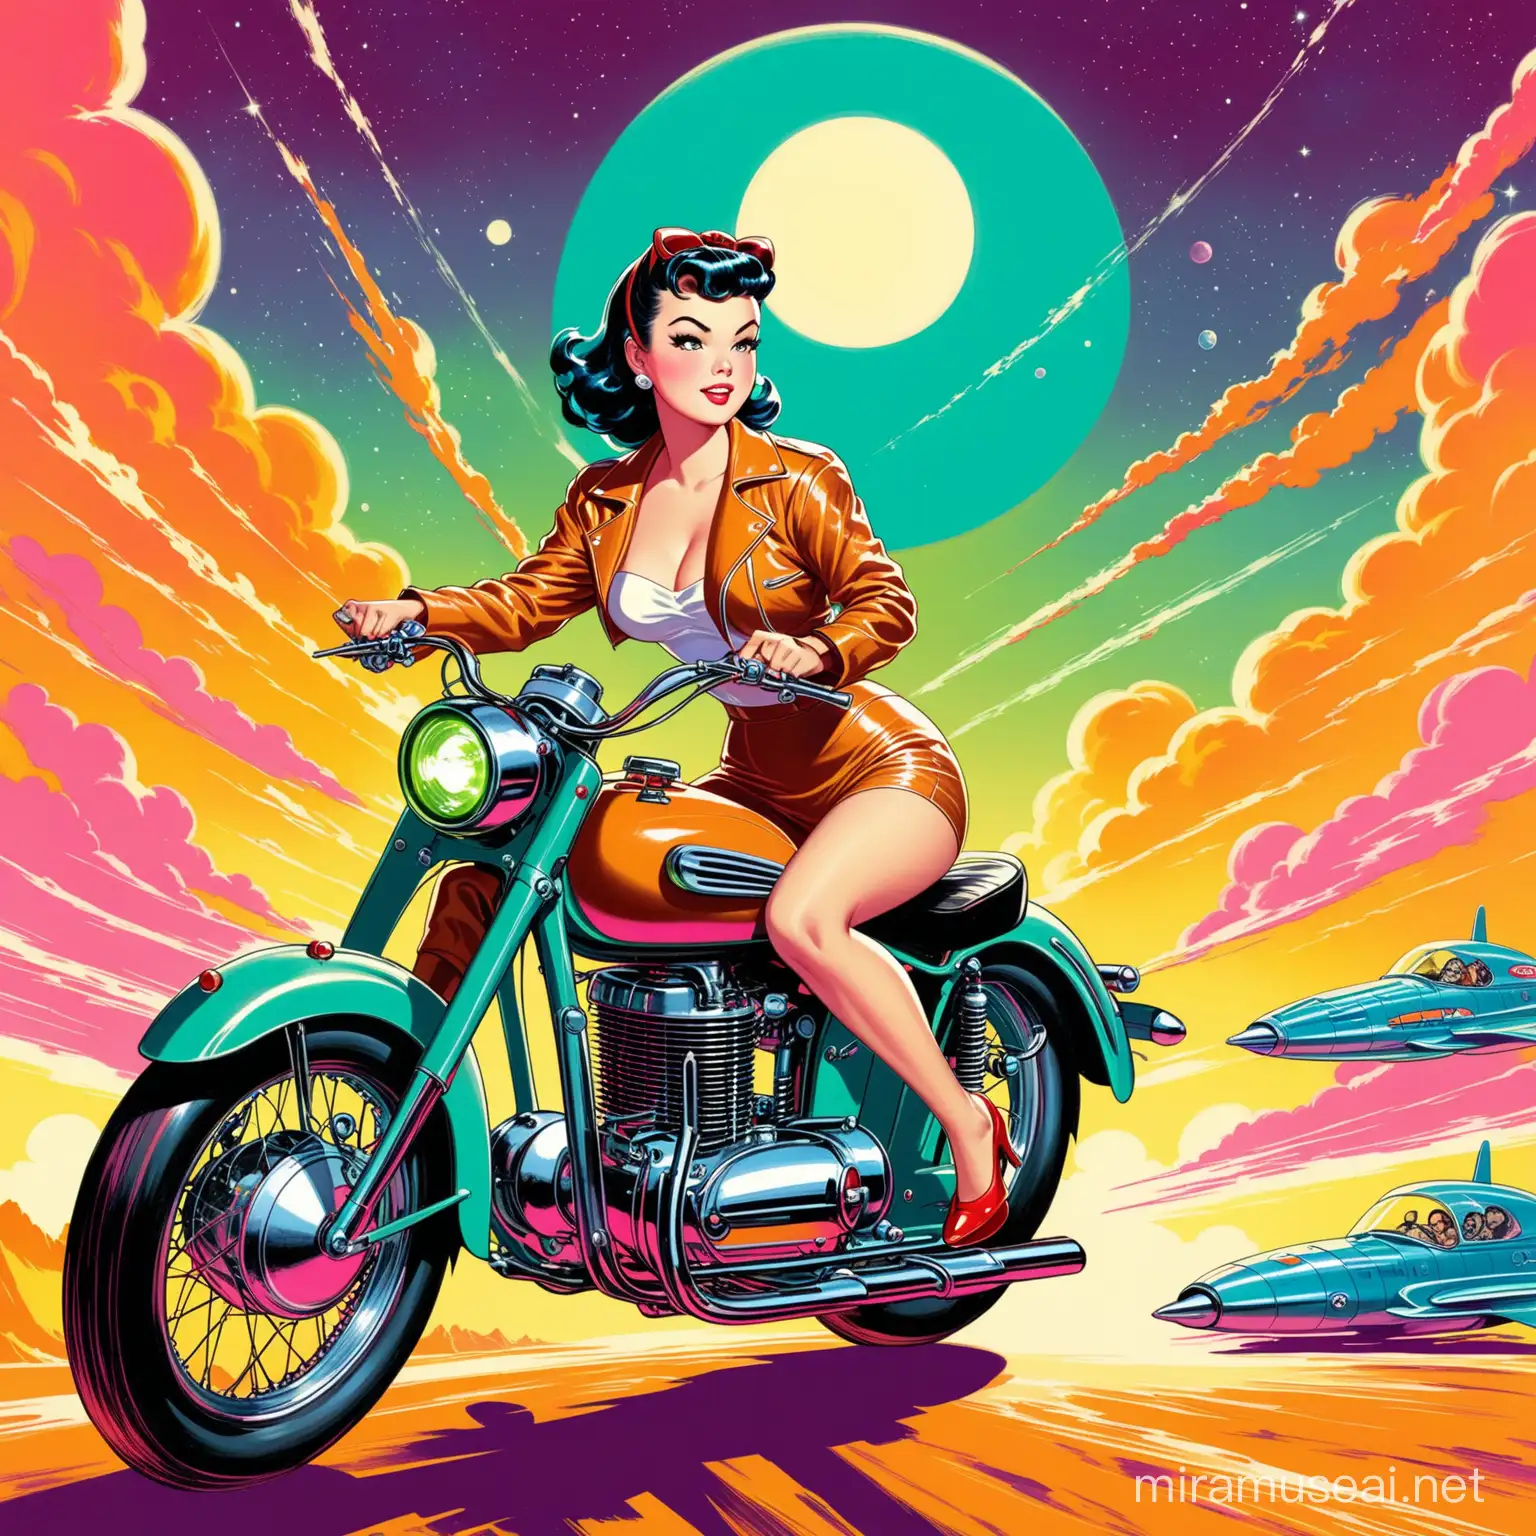 real face jay chou wear lether jacket driving motorcycle dramatic style of 1950s & 1960s vintage sci-fi illustrations, Paint them in the flat colorful style of Gil Elvgren and other colorful pin up sci-fi artists of the 1950s,